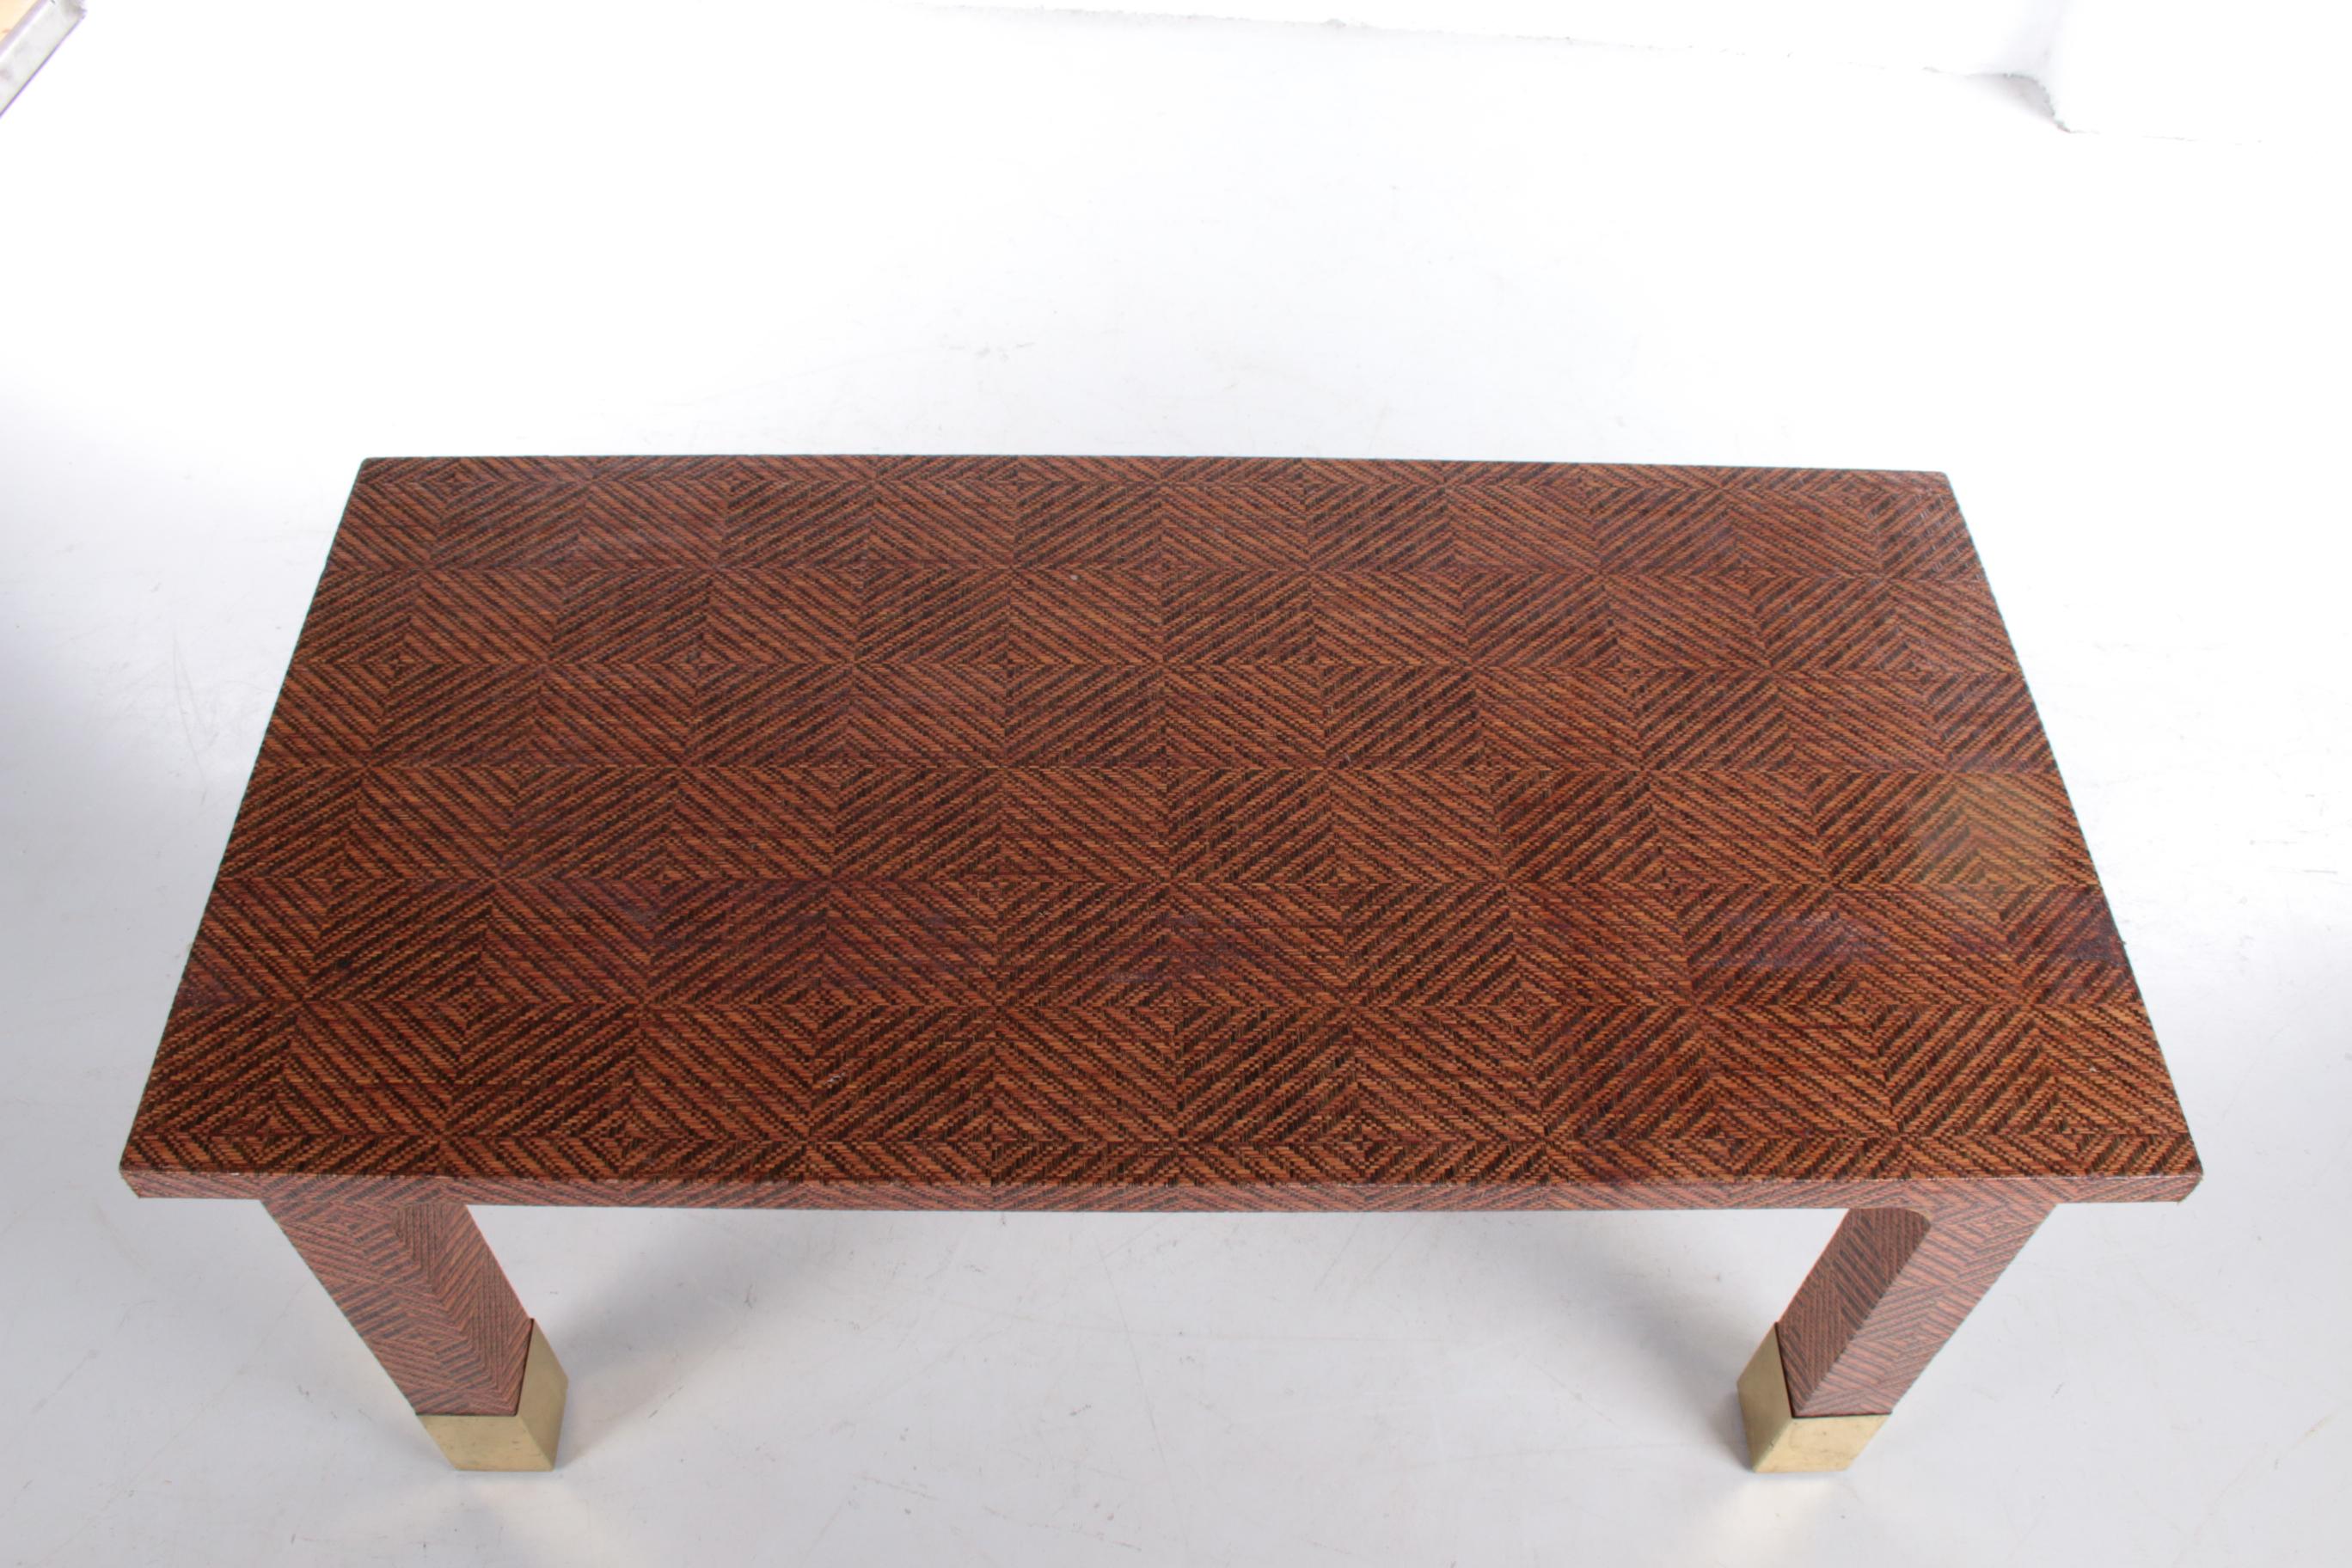 Harrison Van Horn Raffia and Brass Rectangle Coffee Table, 1970 For Sale 4